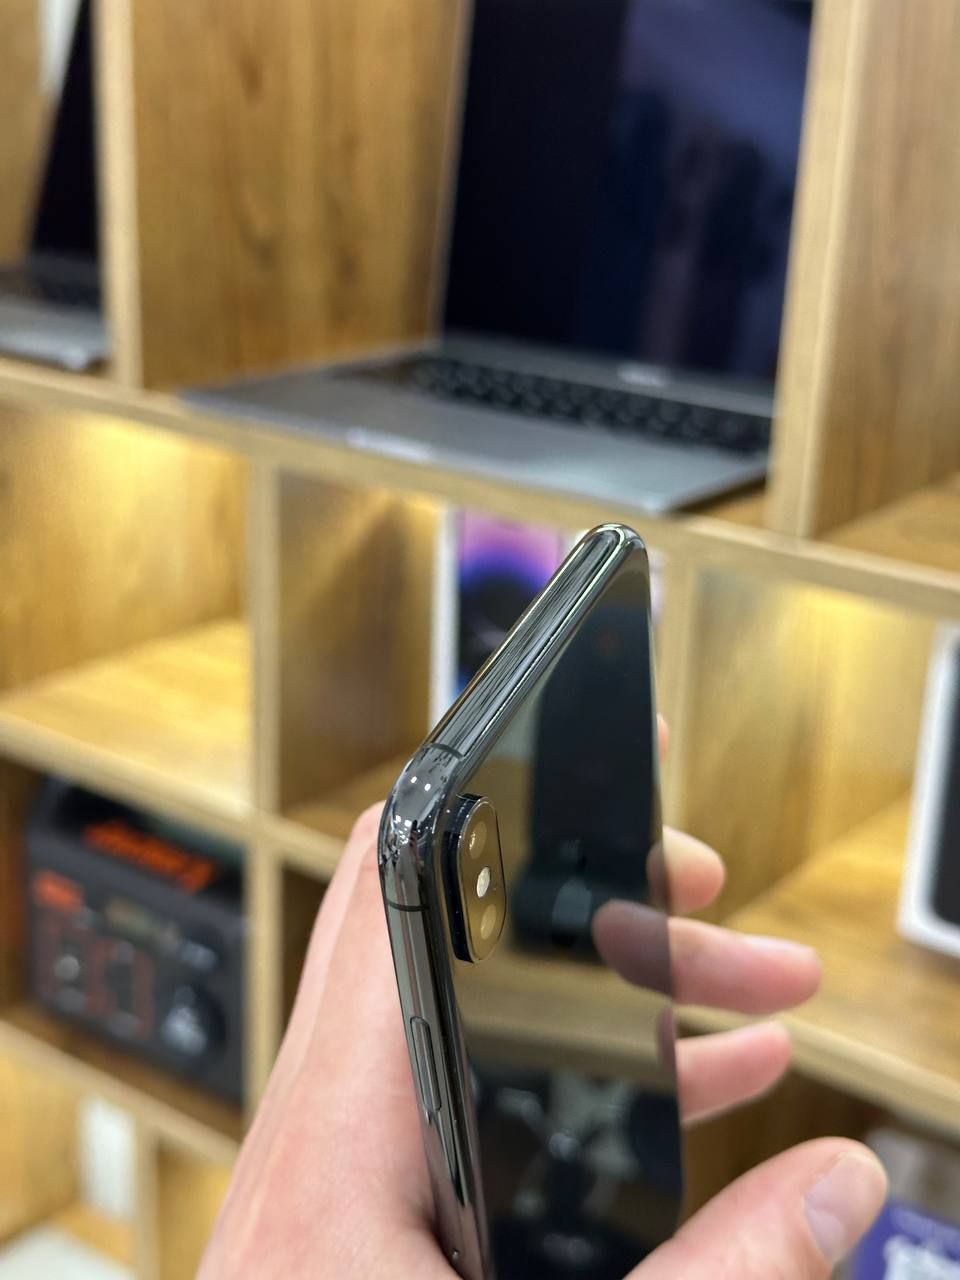 USED_iPhone XS Max 256 Space gray (XSMAX256GR)